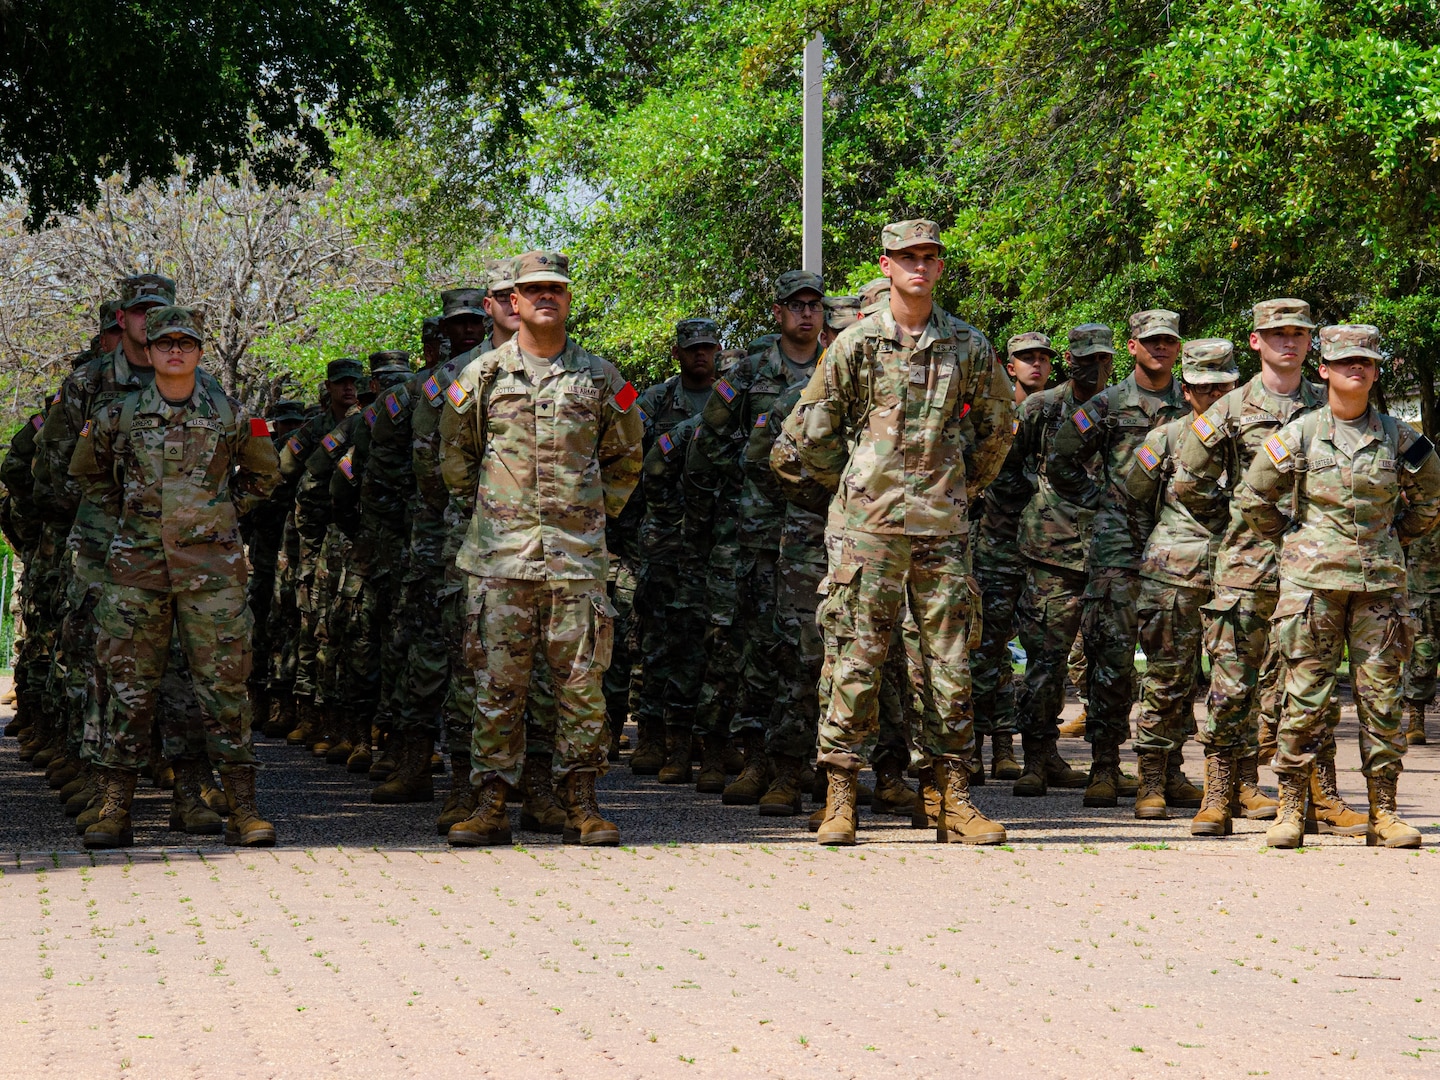 U.S. Army Element Echo Company trainees stand in formation after attending English language courses at the Defense Language Institute English Language Center at Joint Base San Antonio-Lackland, Texas, April 03, 2023. DLIELC is the largest English language training program in the Department of Defense supporting security cooperation objectives for pre-basic combat training trainees in the U.S. Army and Coast Guard, and international military partners. (U.S. Air Force photo by Agnes Koterba)